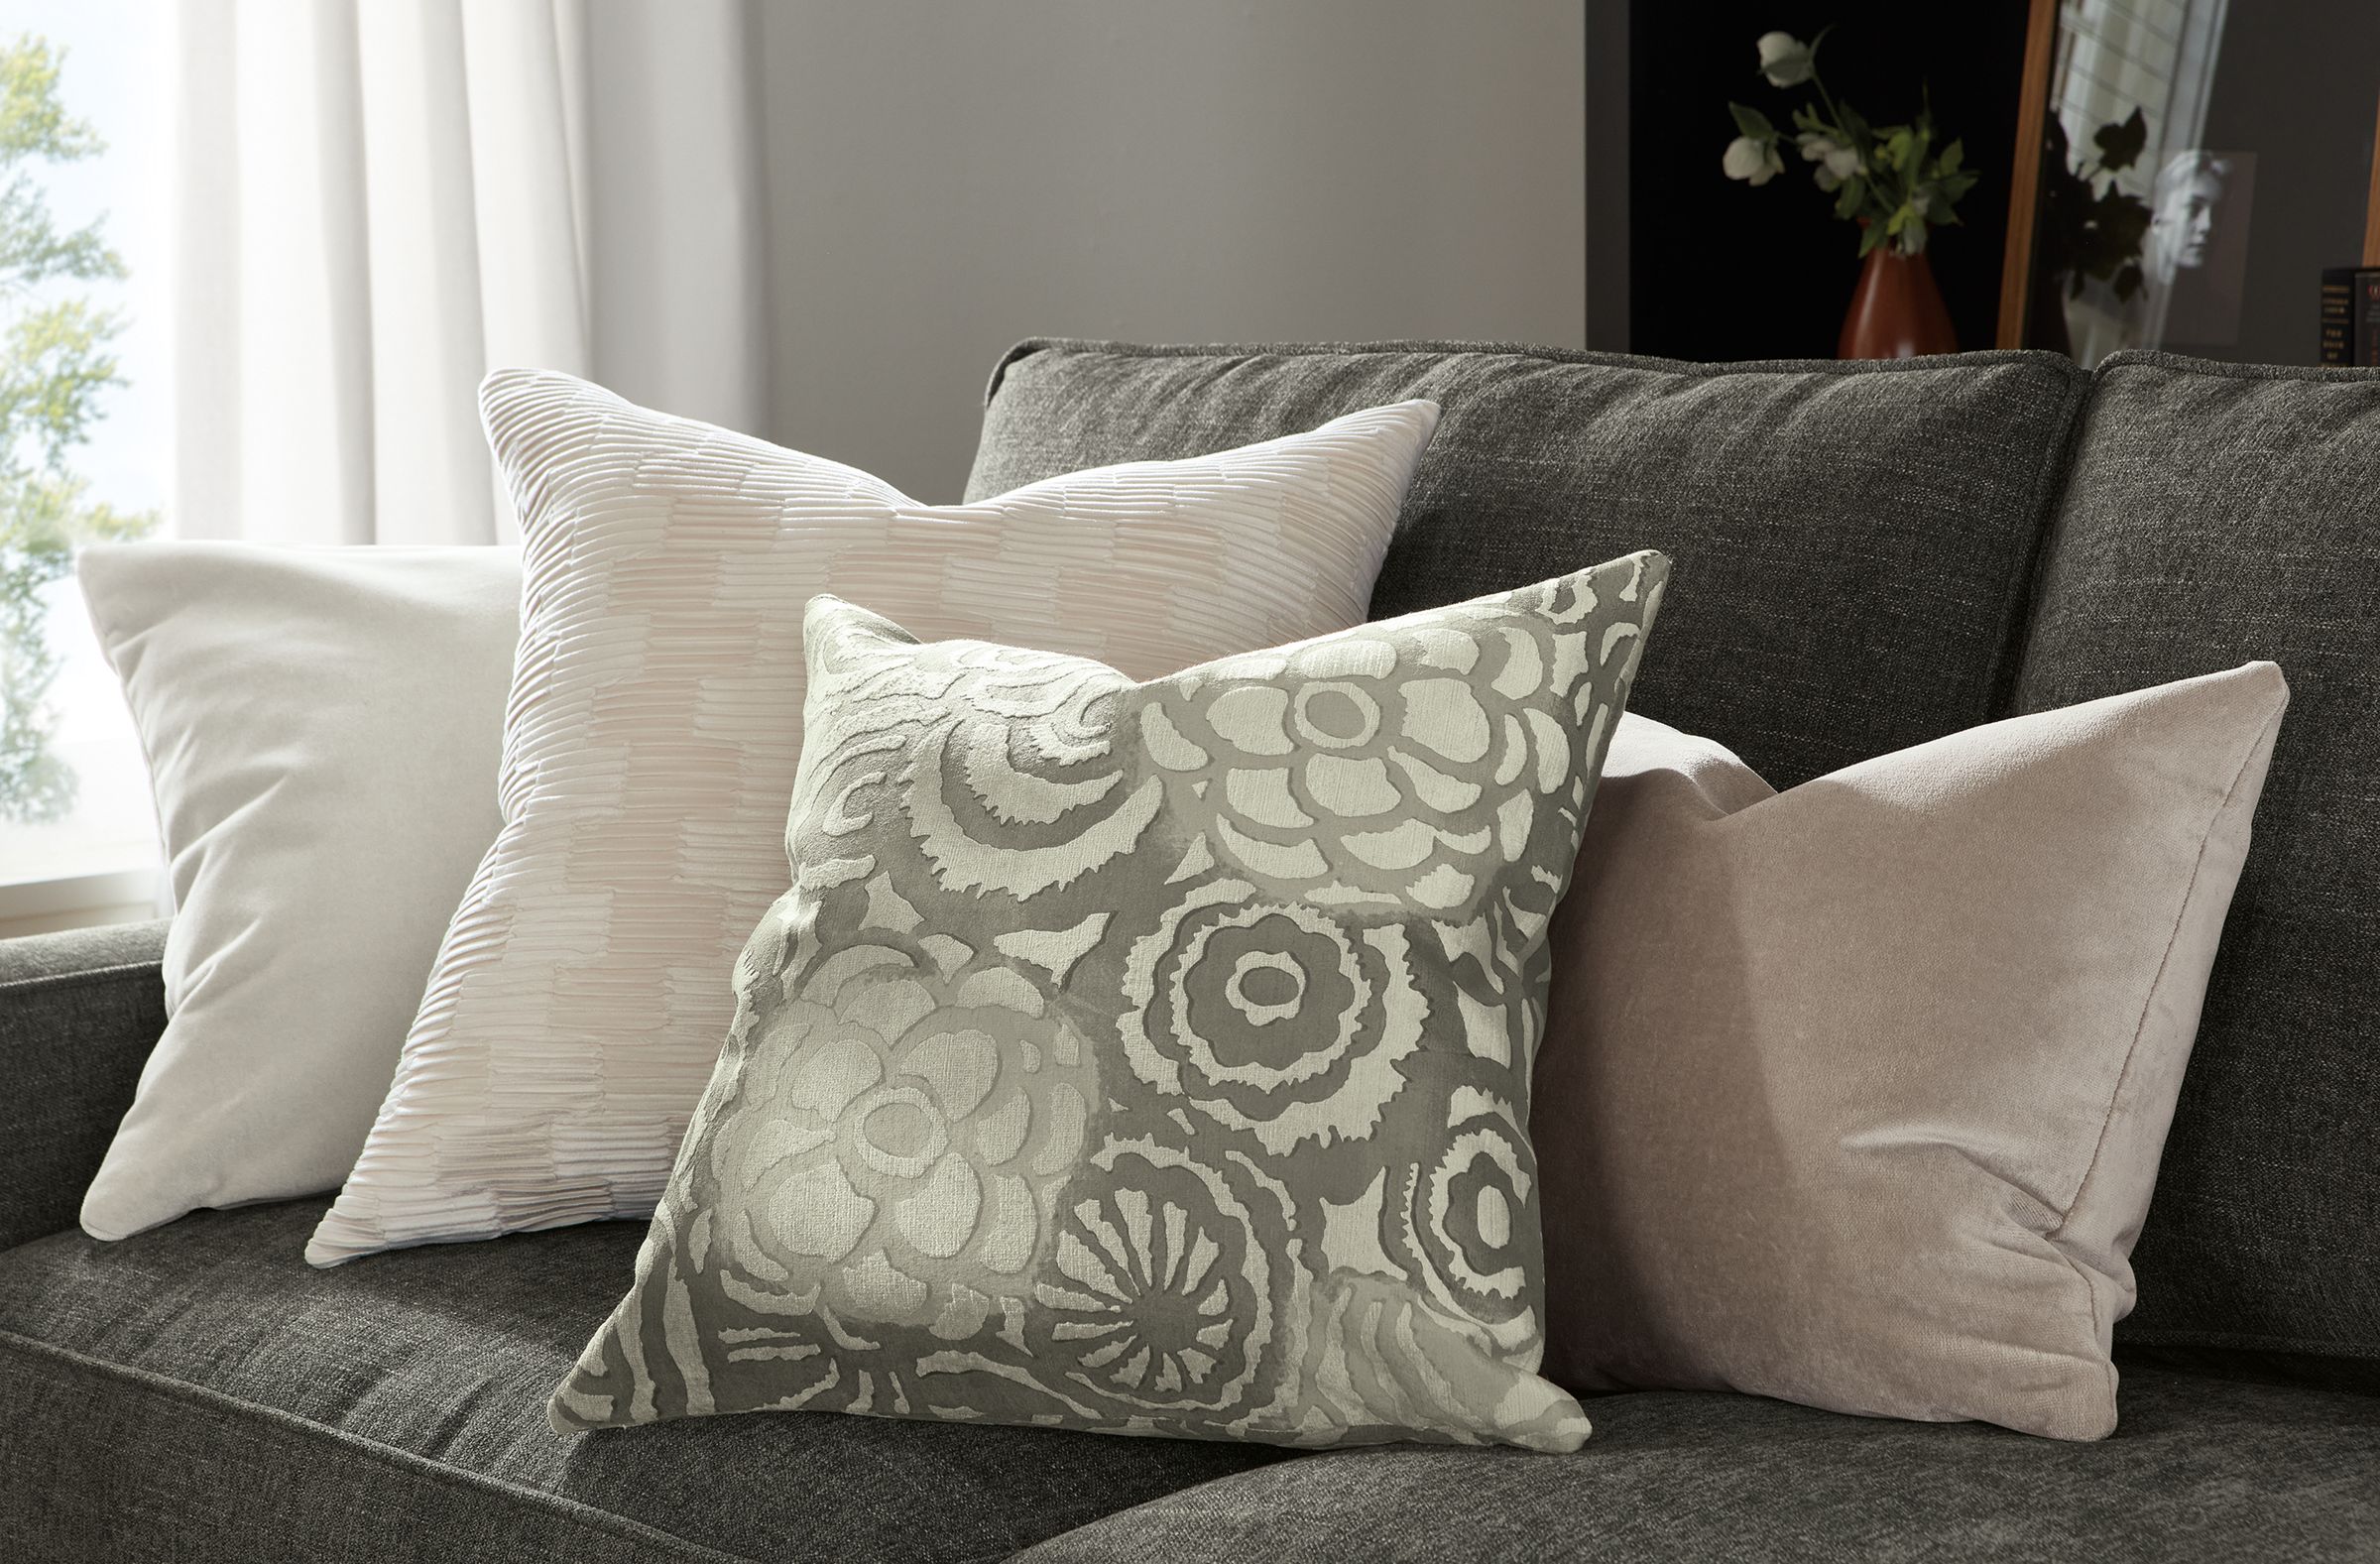 Candace, Makena and Velvet pillows stacked on gray sofa.